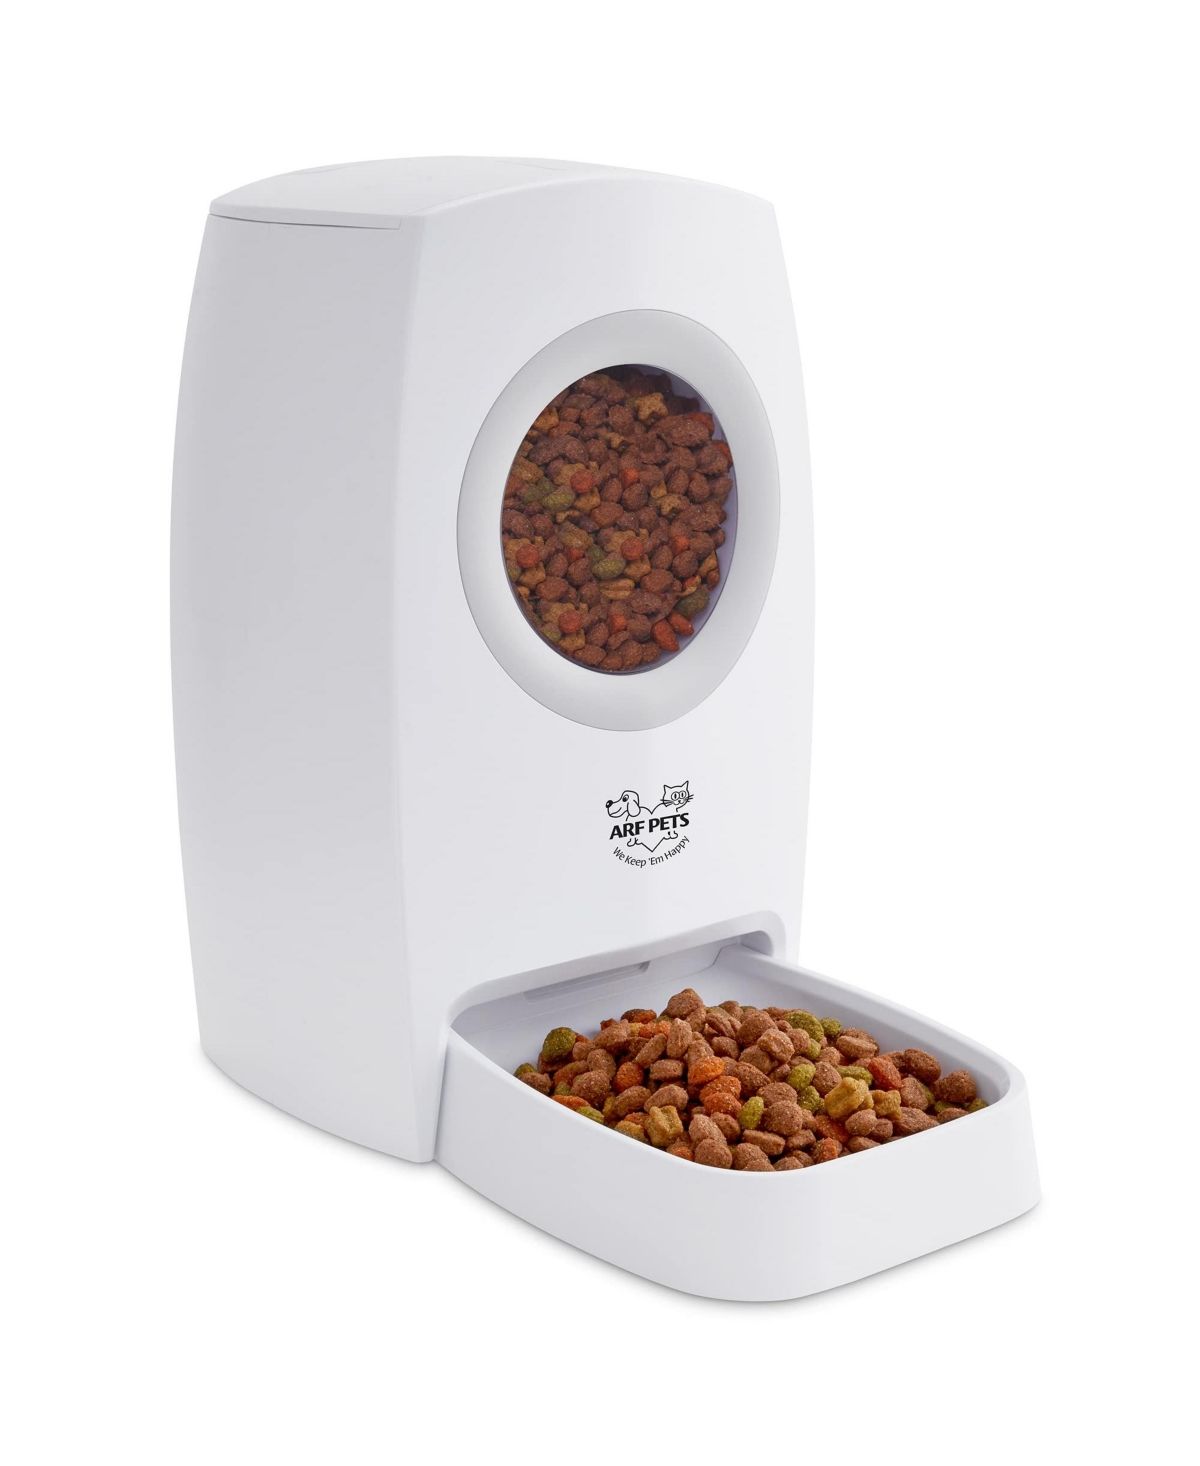 Arf Pets Automatic Pet Feeder, Food Dispenser for Dogs with Timer | Macys (US)